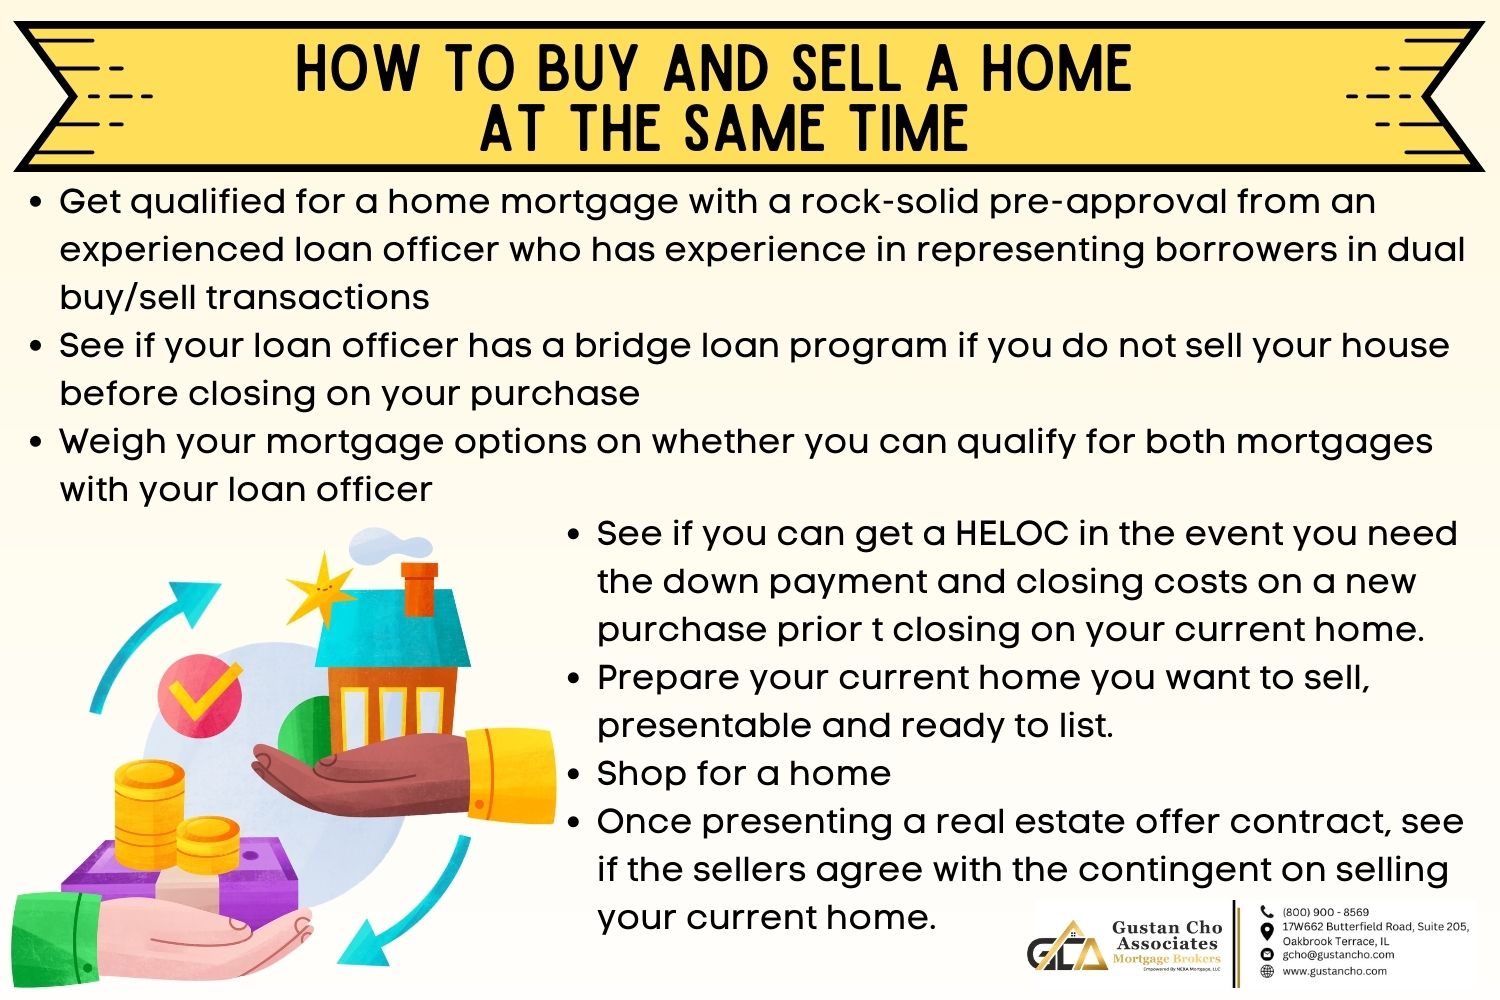 Buying and Selling a Home at the Same Time Without Stress